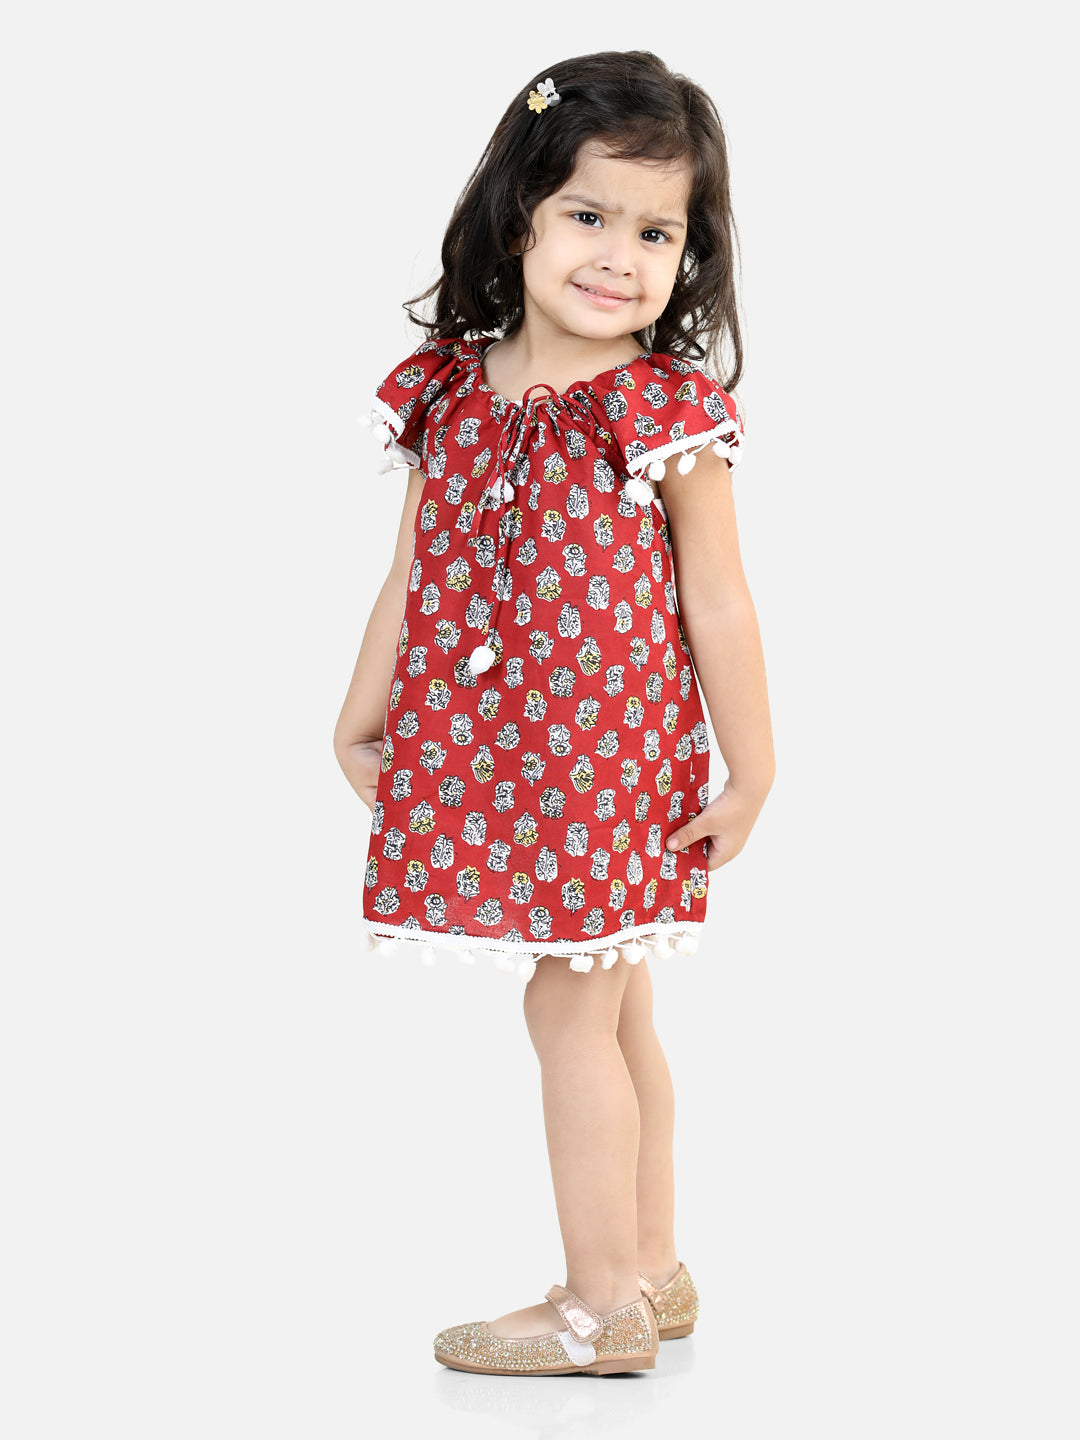 BownBee 100% Cotton Printed with Pompom Jhabla Frock for Girls- Maroon